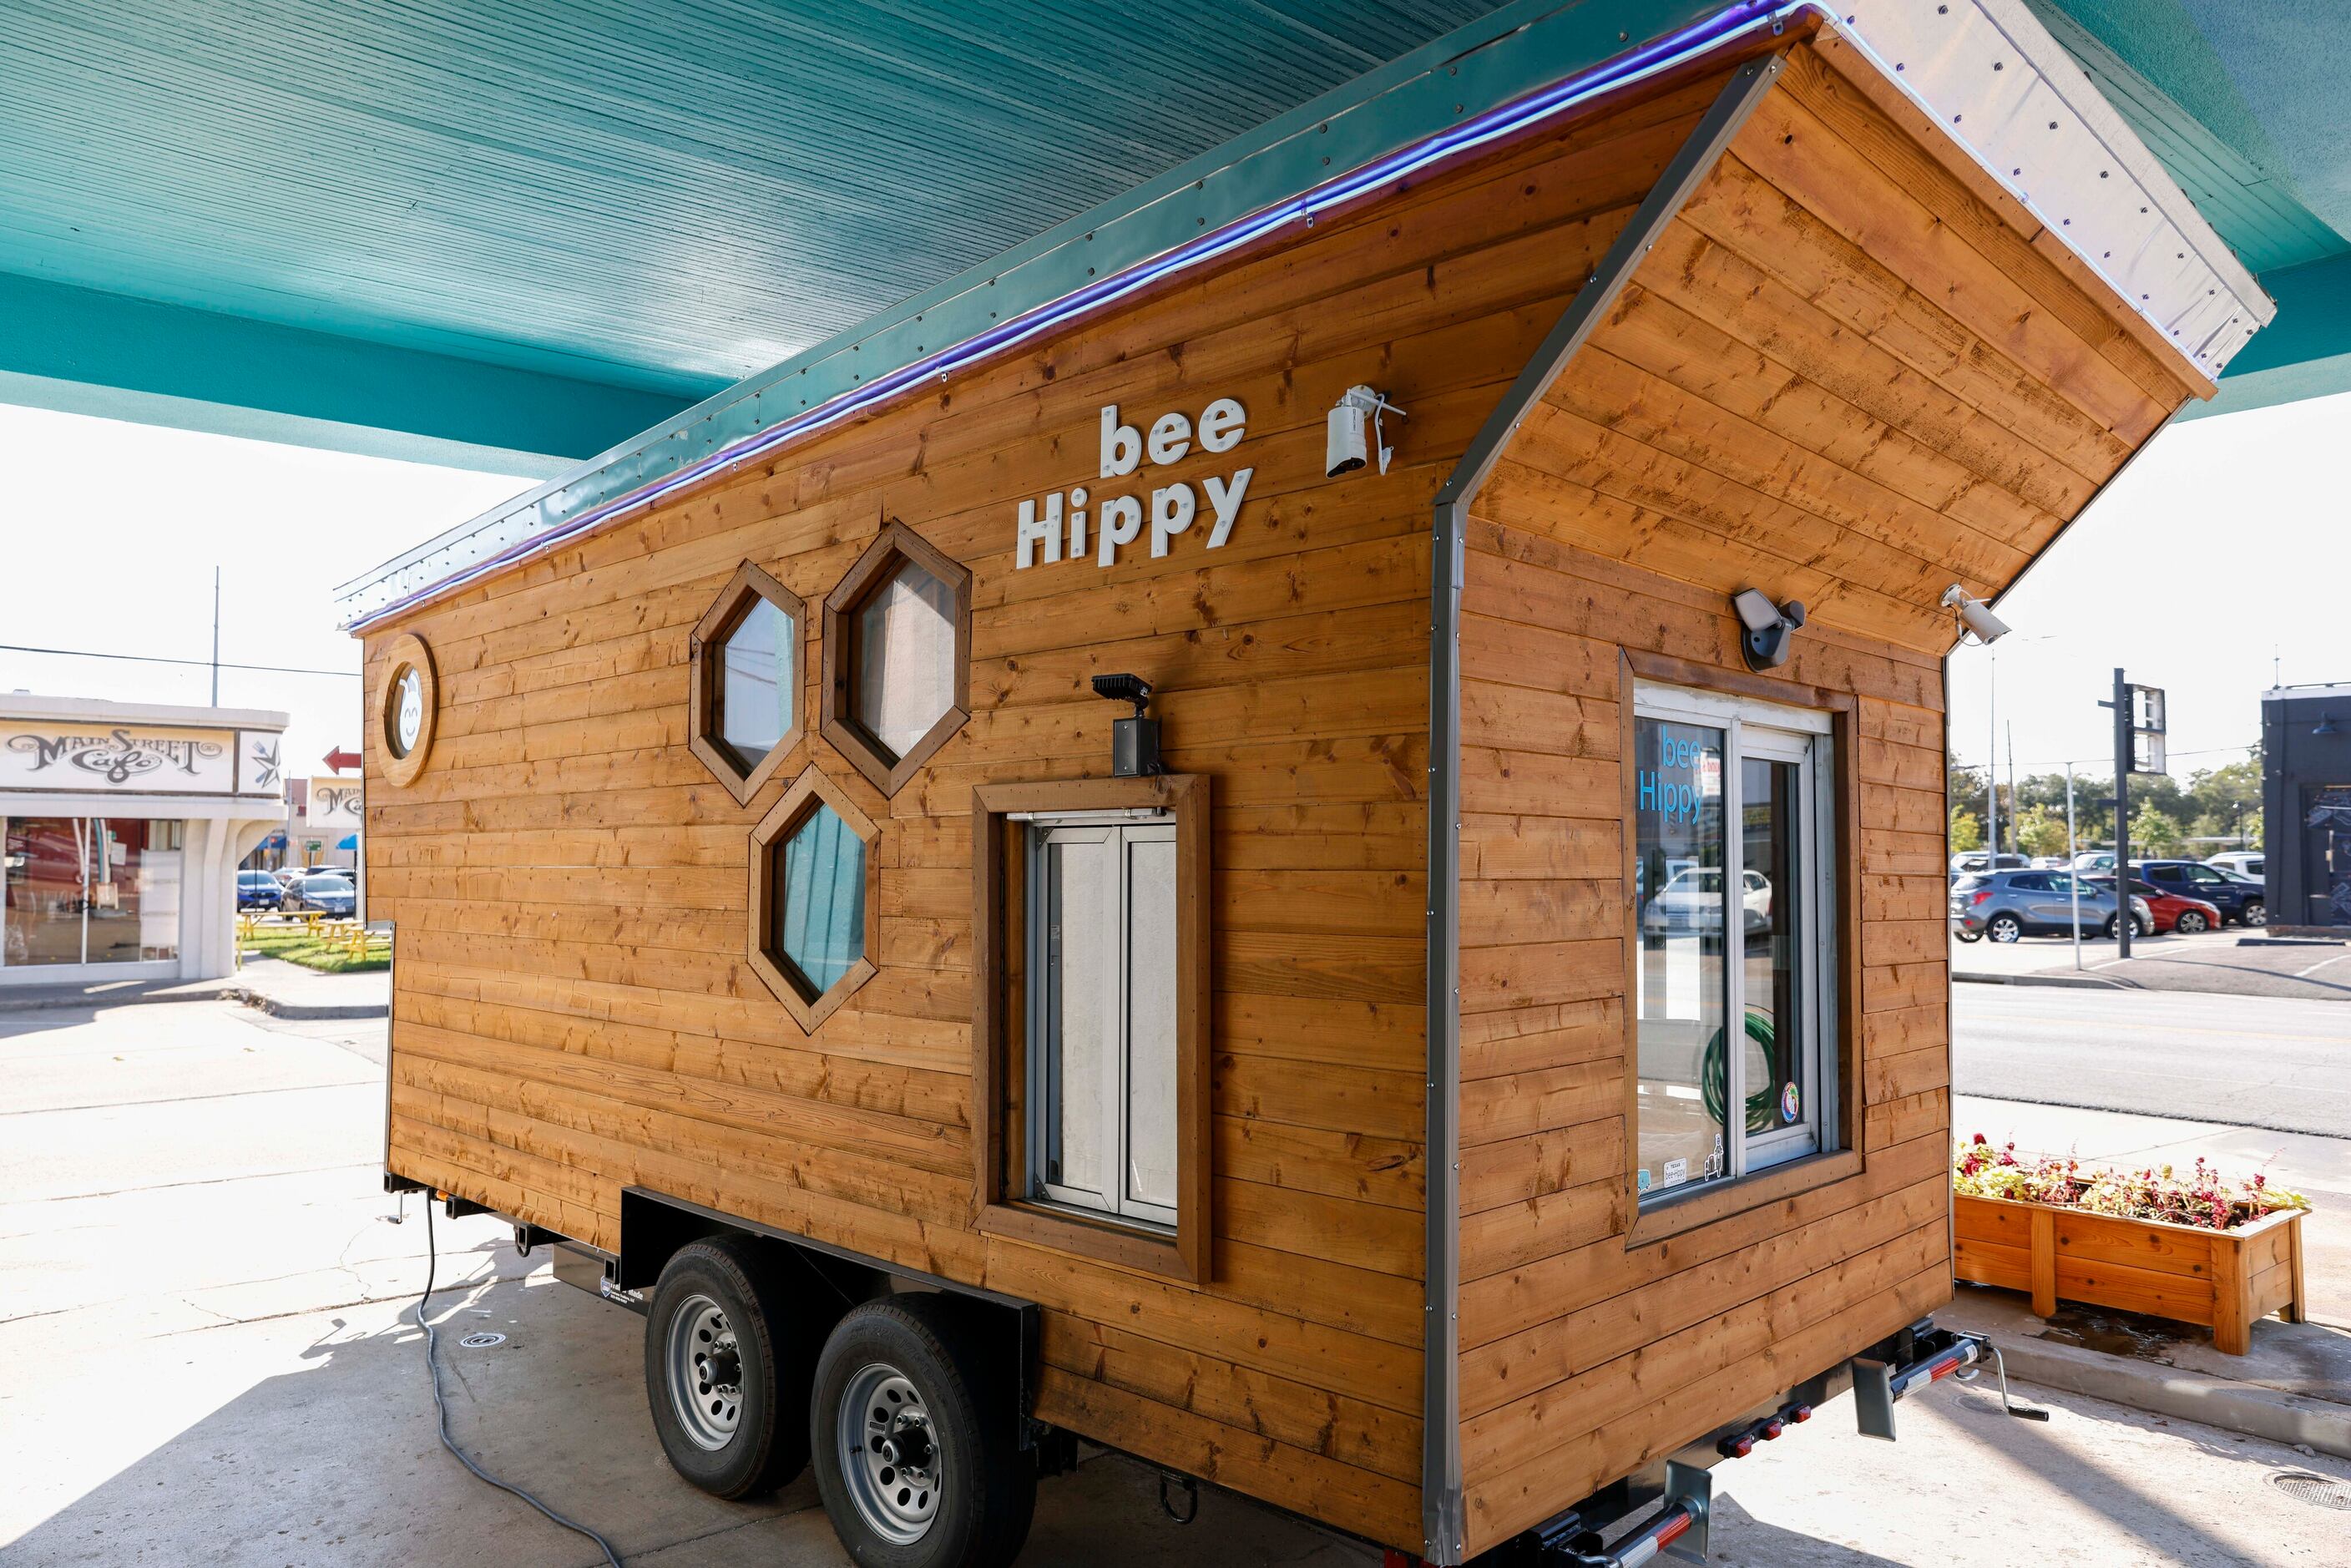 Outside the Bee Hippy showroom is a trailer that owner Chris Fagan said he takes to local...